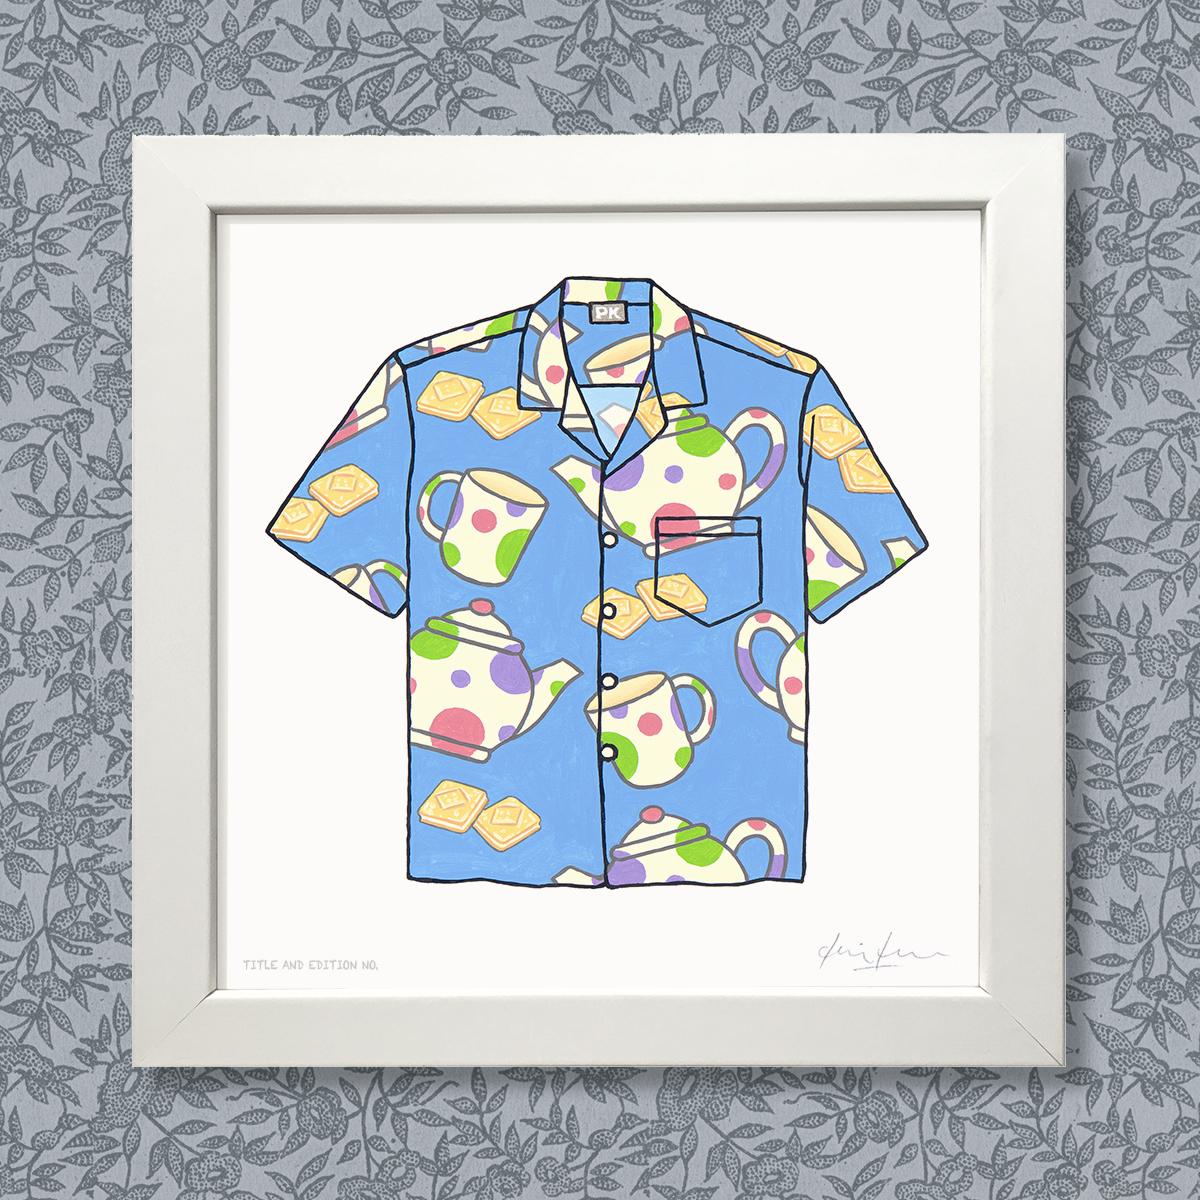 Limited edition print - Very Loud Shirt - in white frame